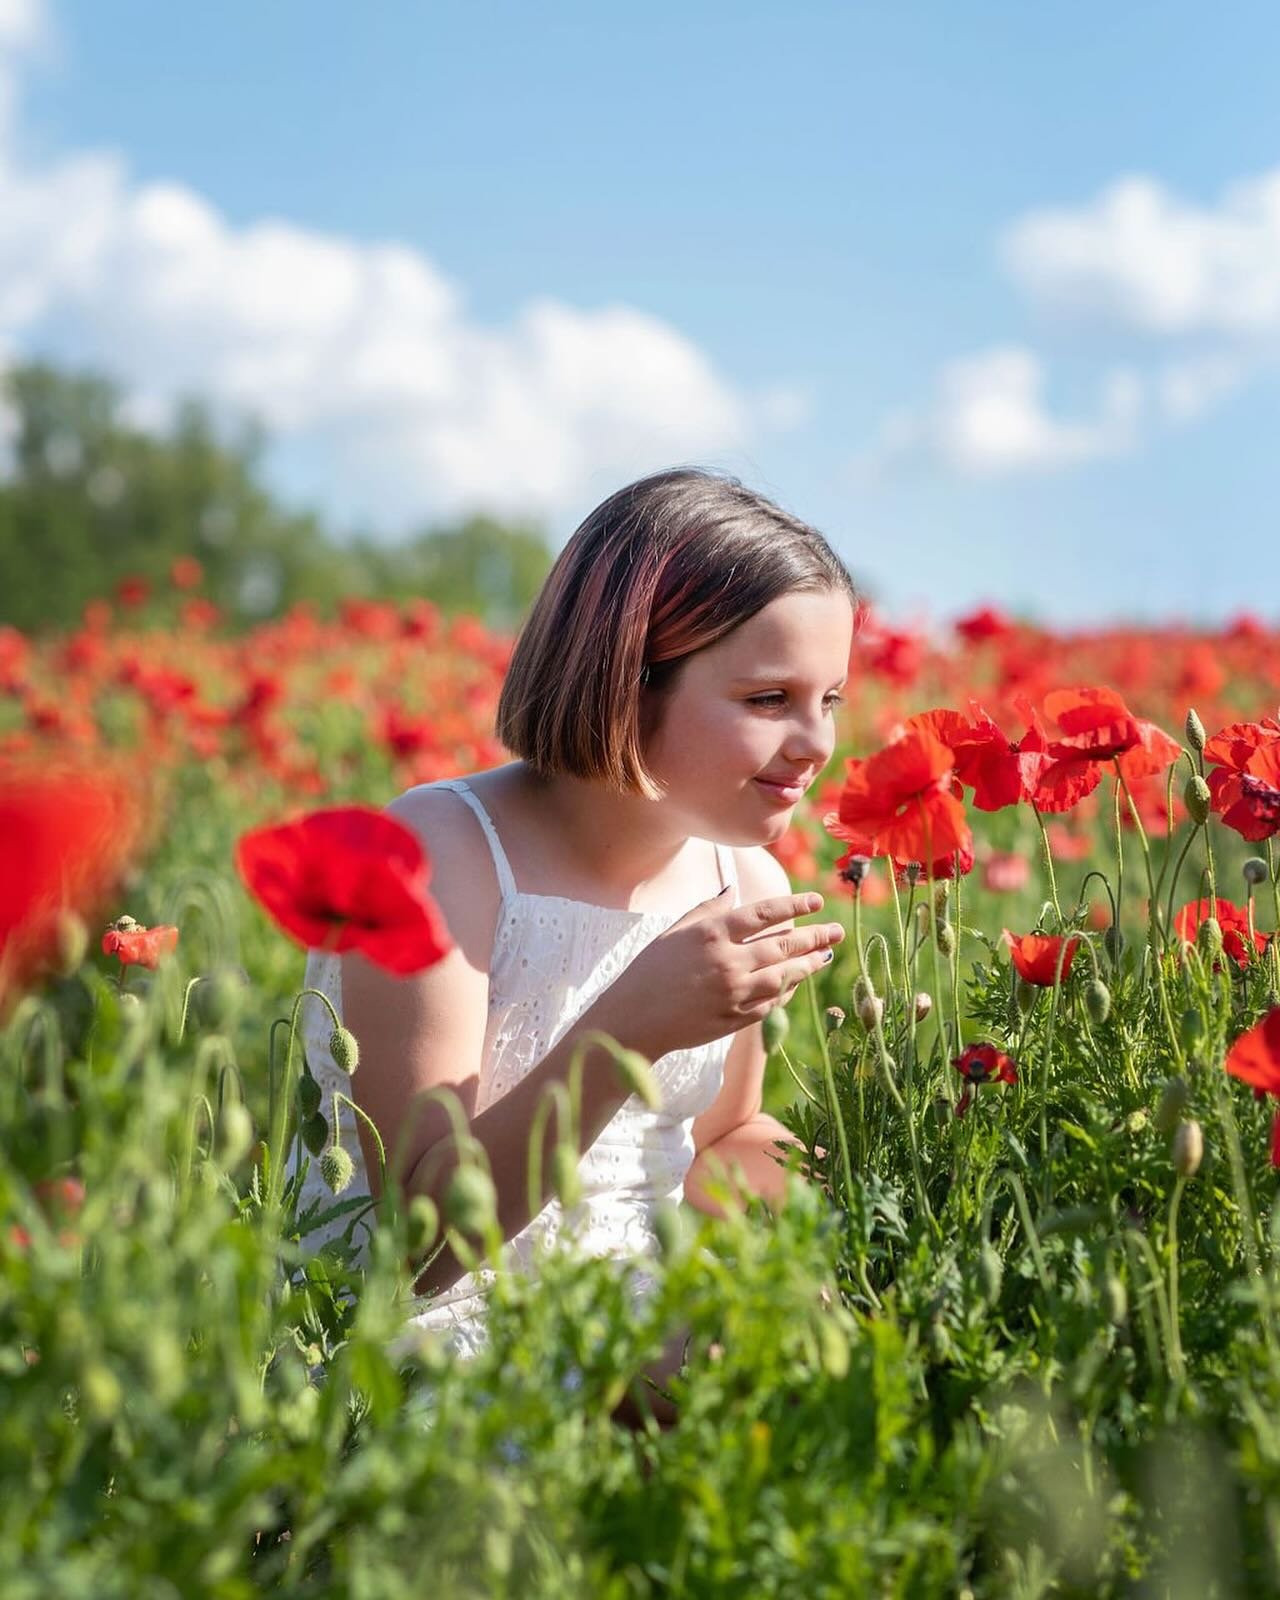 Oh happy day! Poppy mini sessions are back!! I haven&rsquo;t stopped thinking about these fields since last May. Mini session date is May 4th, which coincides with @dogwoodfarmsupick first ever poppy festival. There will be food trucks, vendors, and 